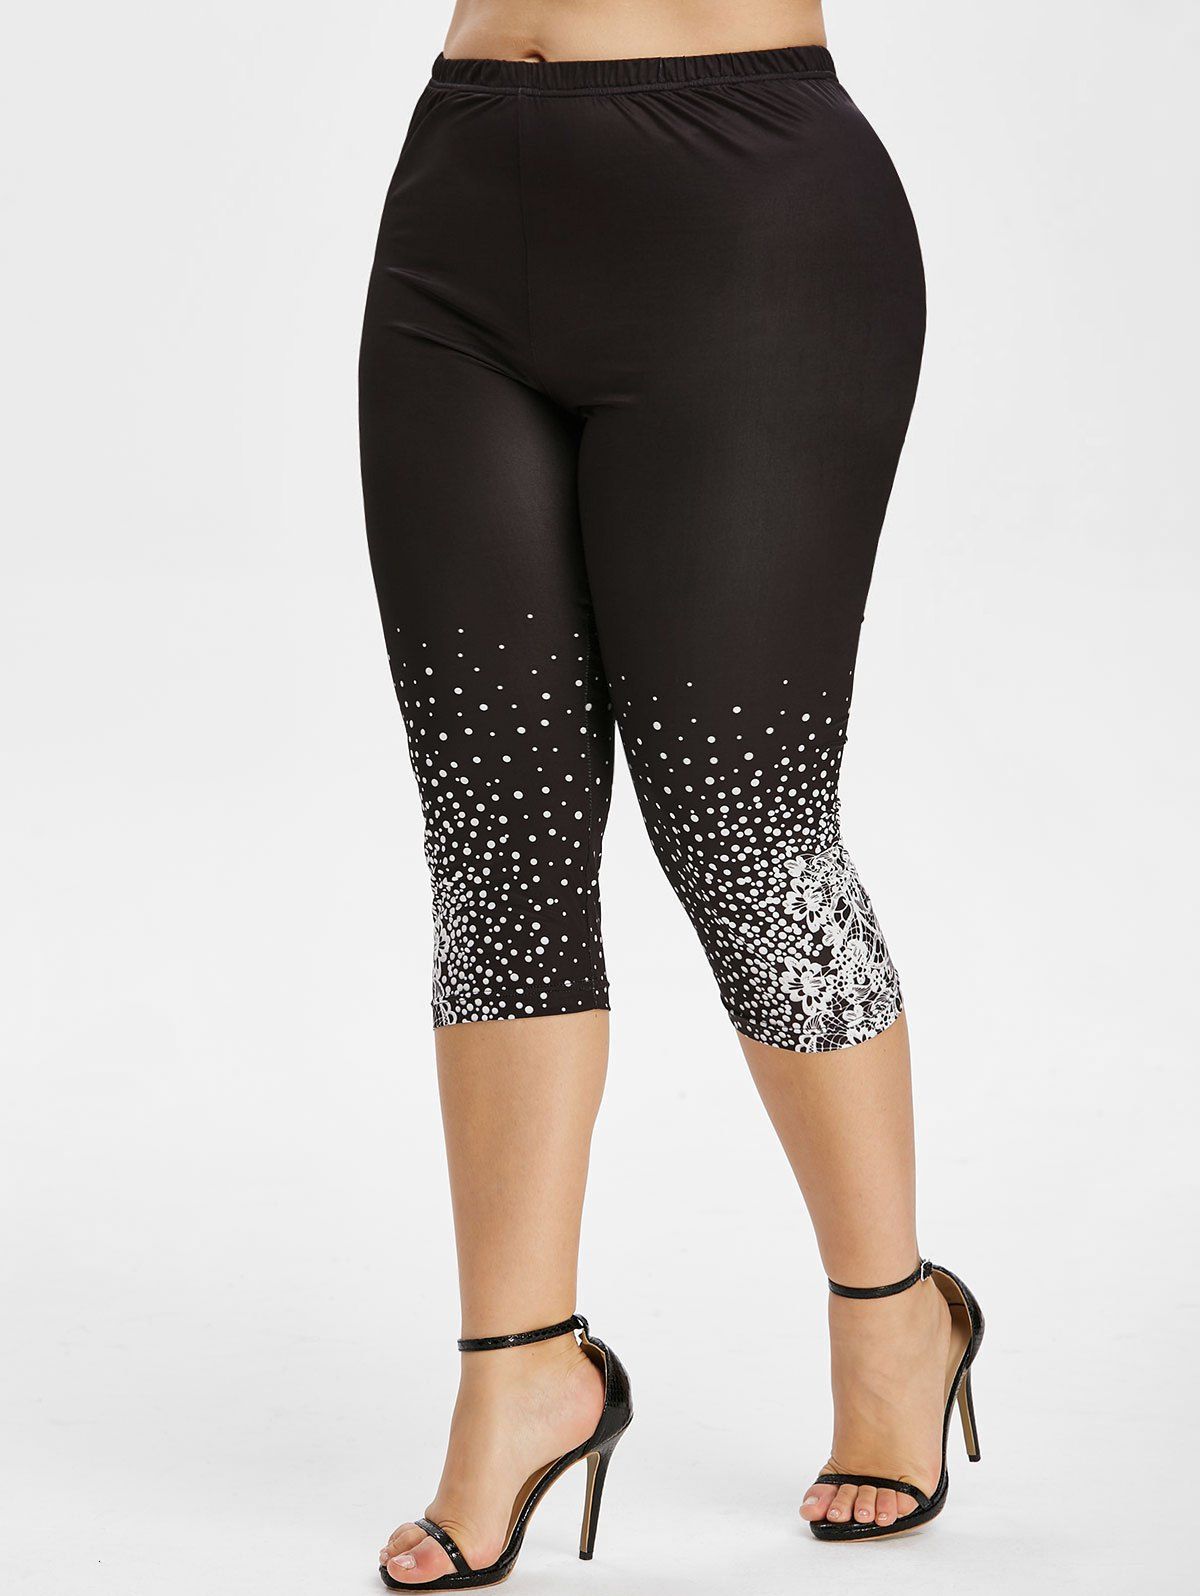 32-off-2020-floral-dots-high-waisted-plus-size-capri-leggings-in